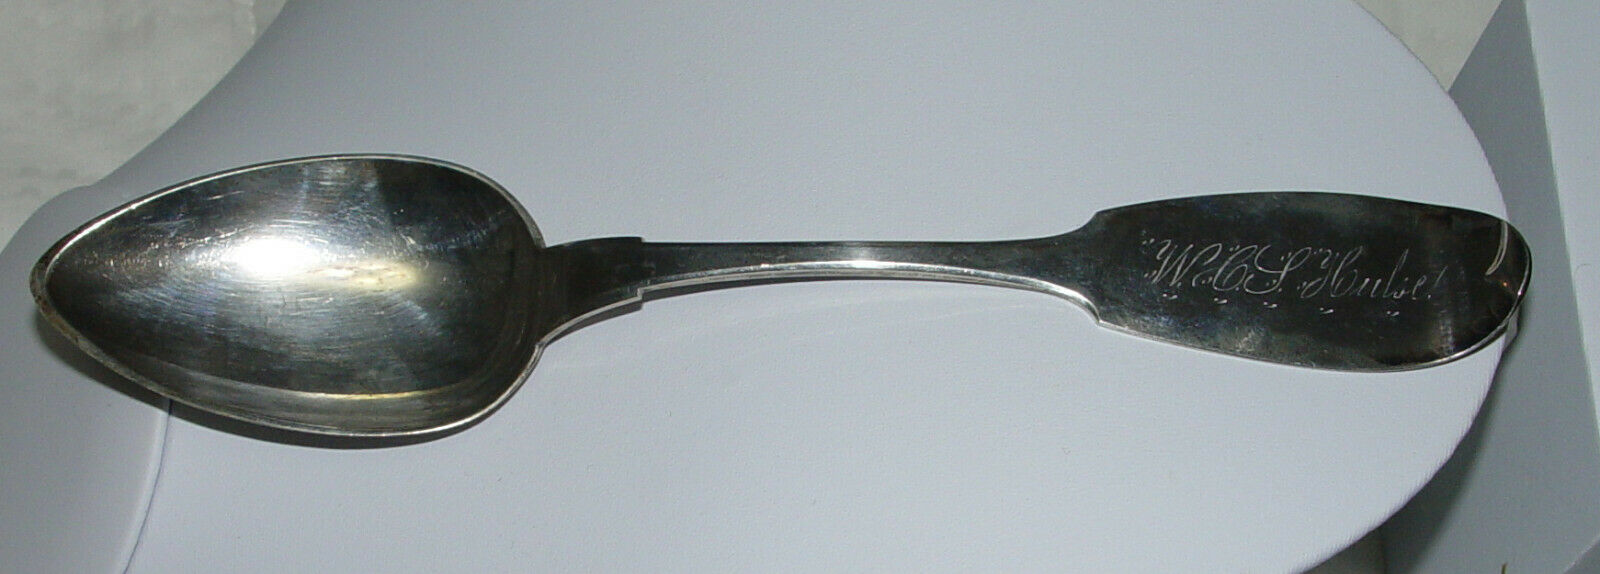 1800's J. Hollister Pure Coin Silver Table Spoon